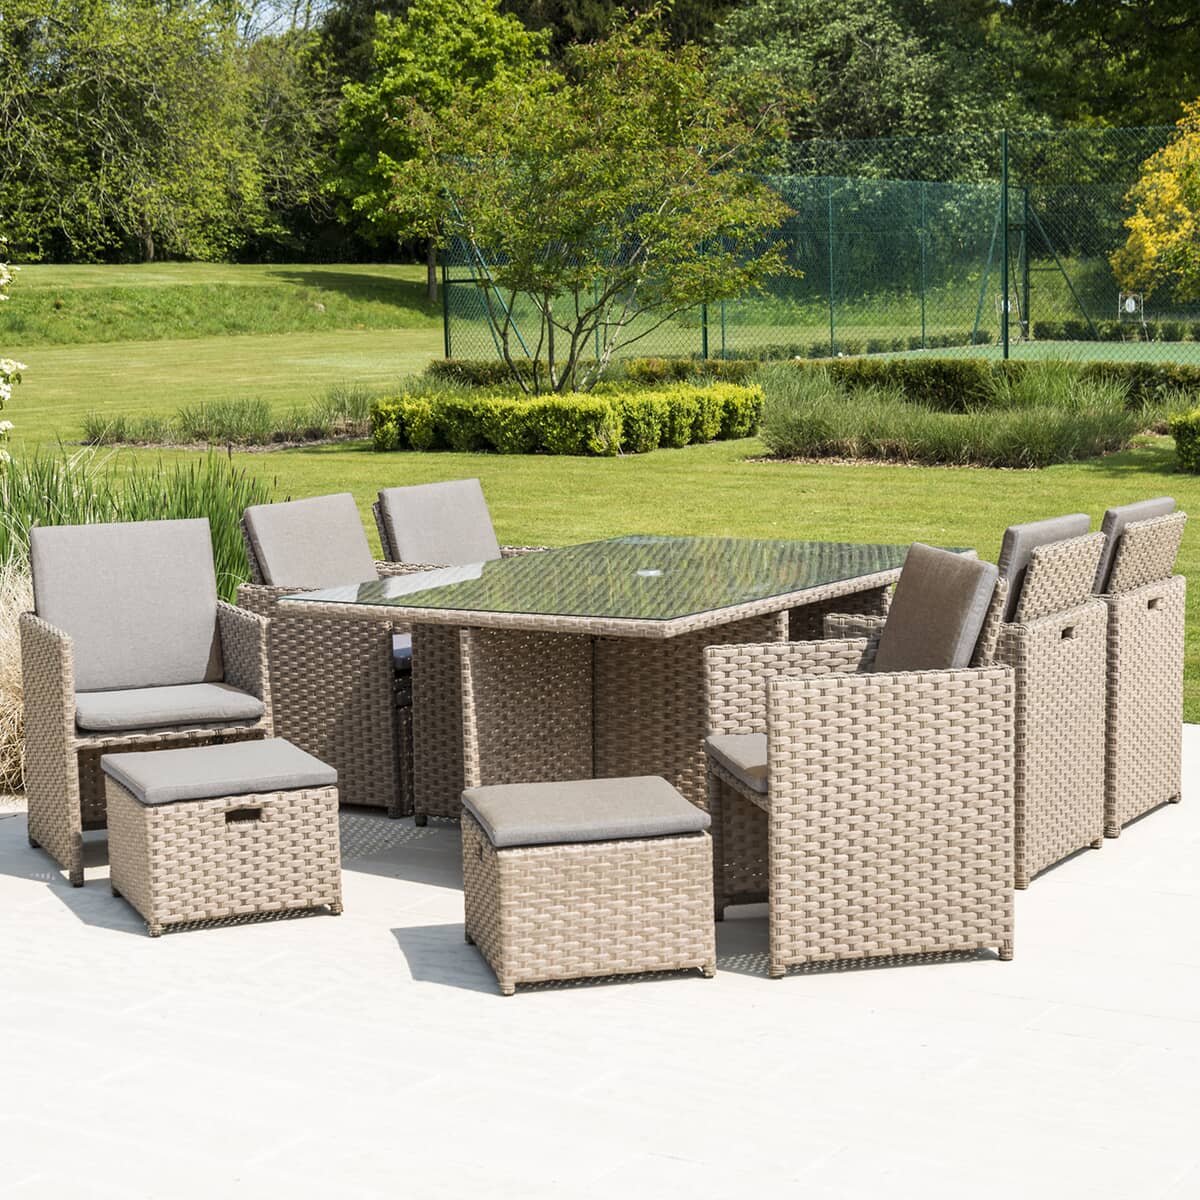 Bespoke Grand Fawn 6 Seat Cube Dining Set with 4 footstools